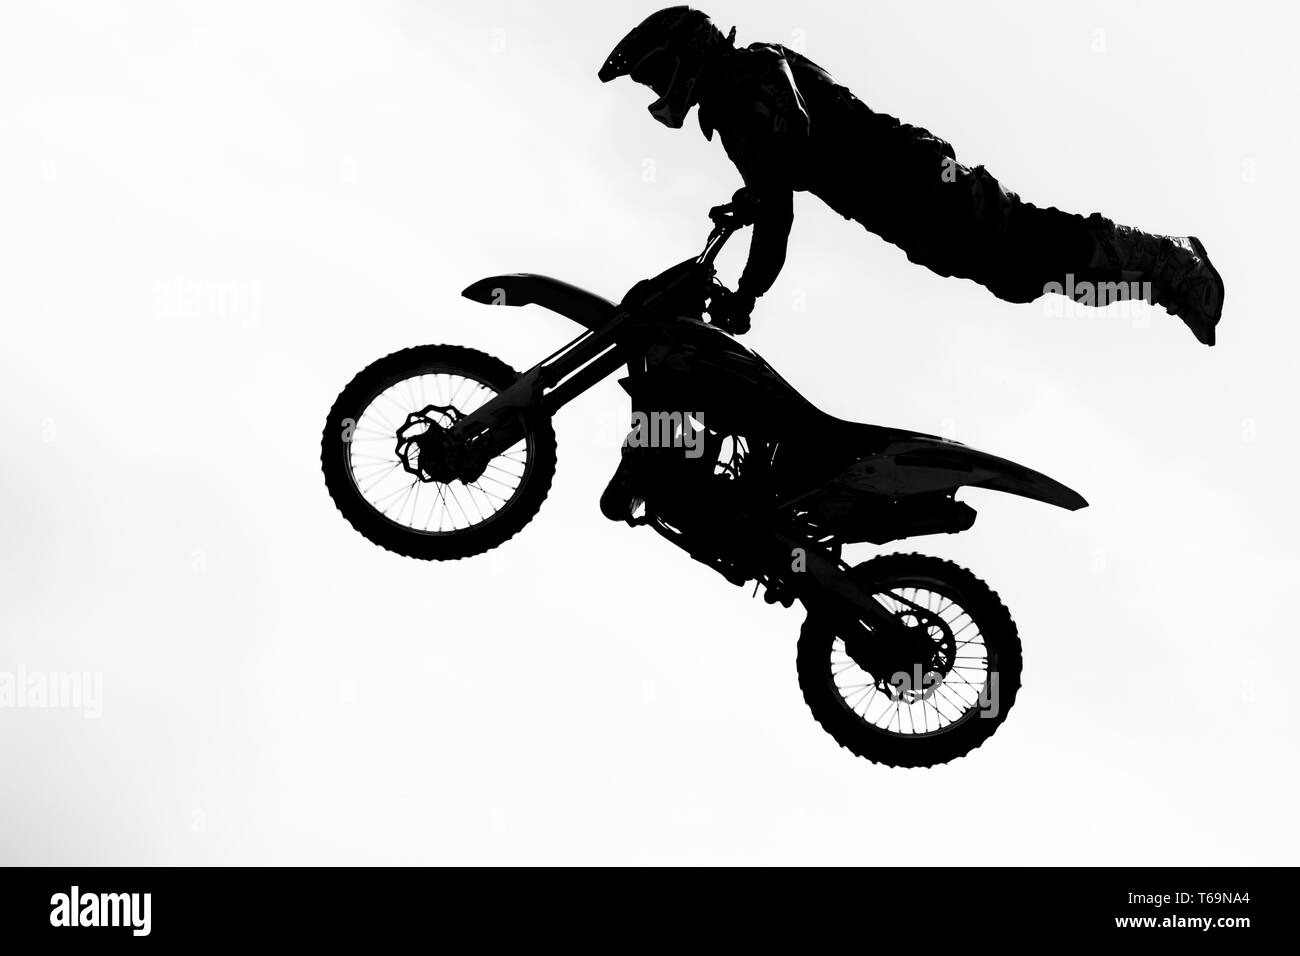 Motocross Black and White Stock Photos & Images - Alamy